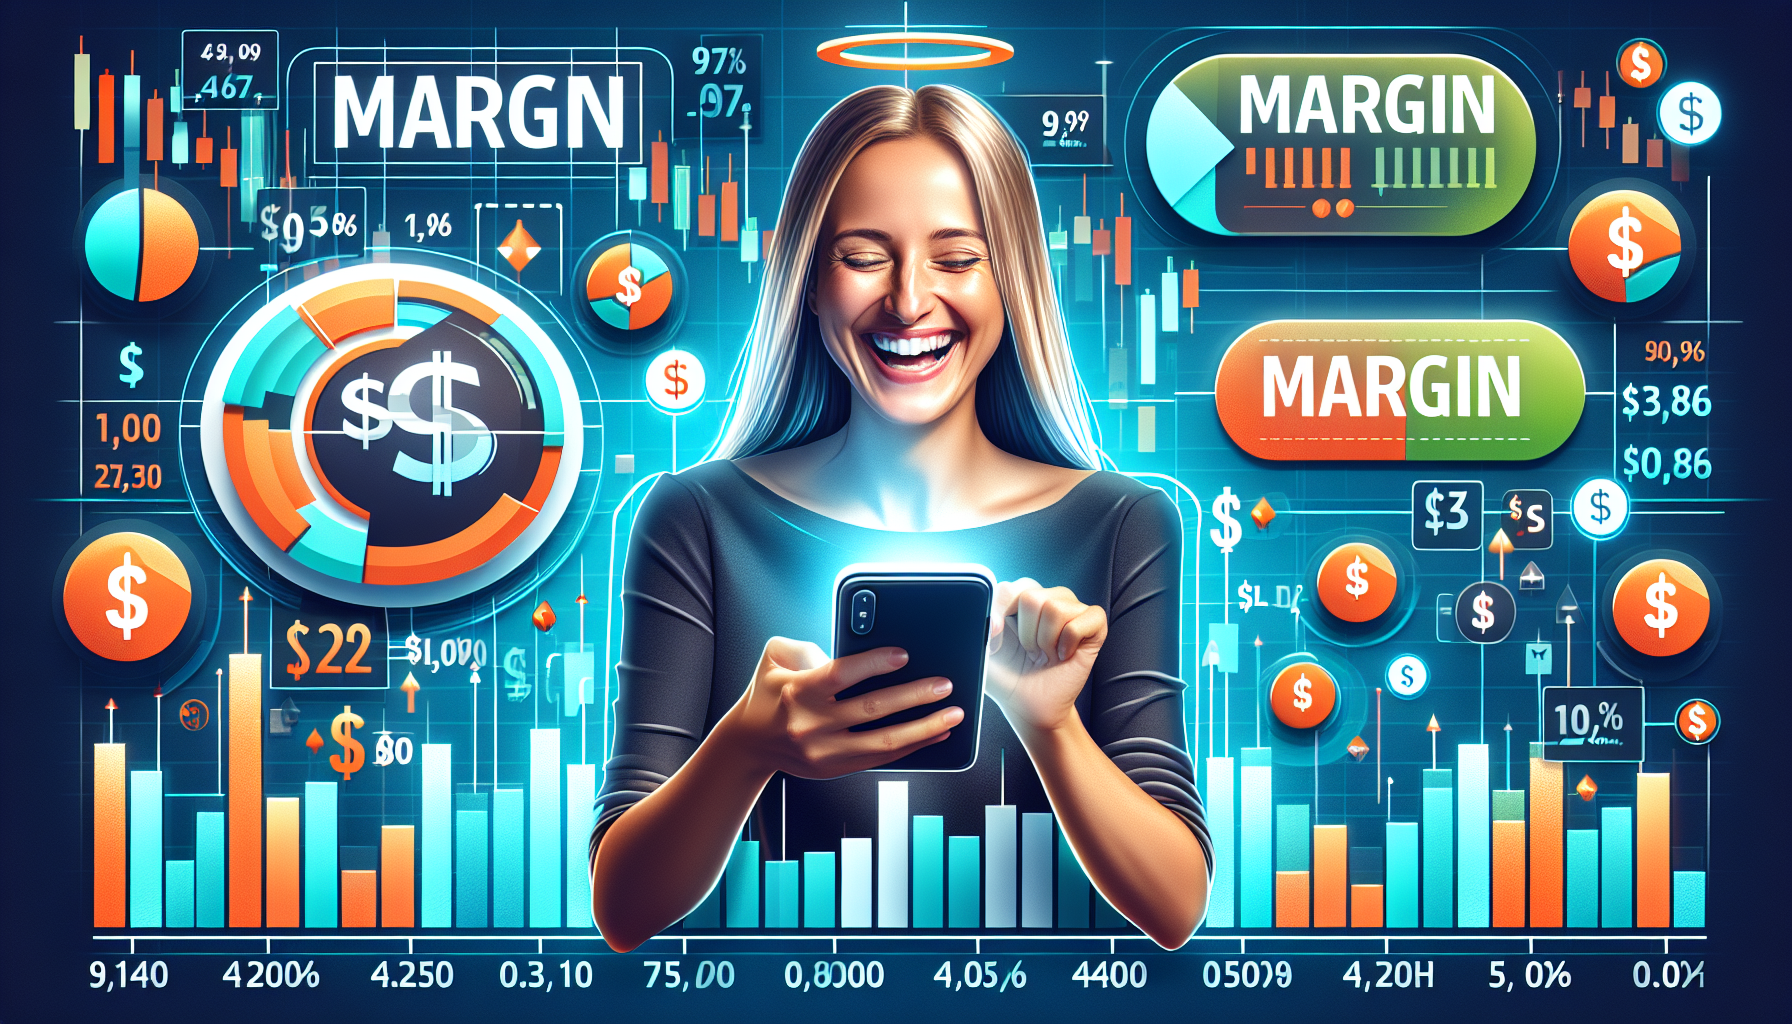 Create an illustration showcasing the concept of Webull margin trading. Include elements like an excited trader using the Webull app on their smartphone, financial charts, and graphs displaying margin requirements and equity balances. Incorporate visual cues demonstrating borrowing money for trading, such as magnified dollar signs and a progress bar indicating margin levels. Use a modern, sleek design with a financial theme.